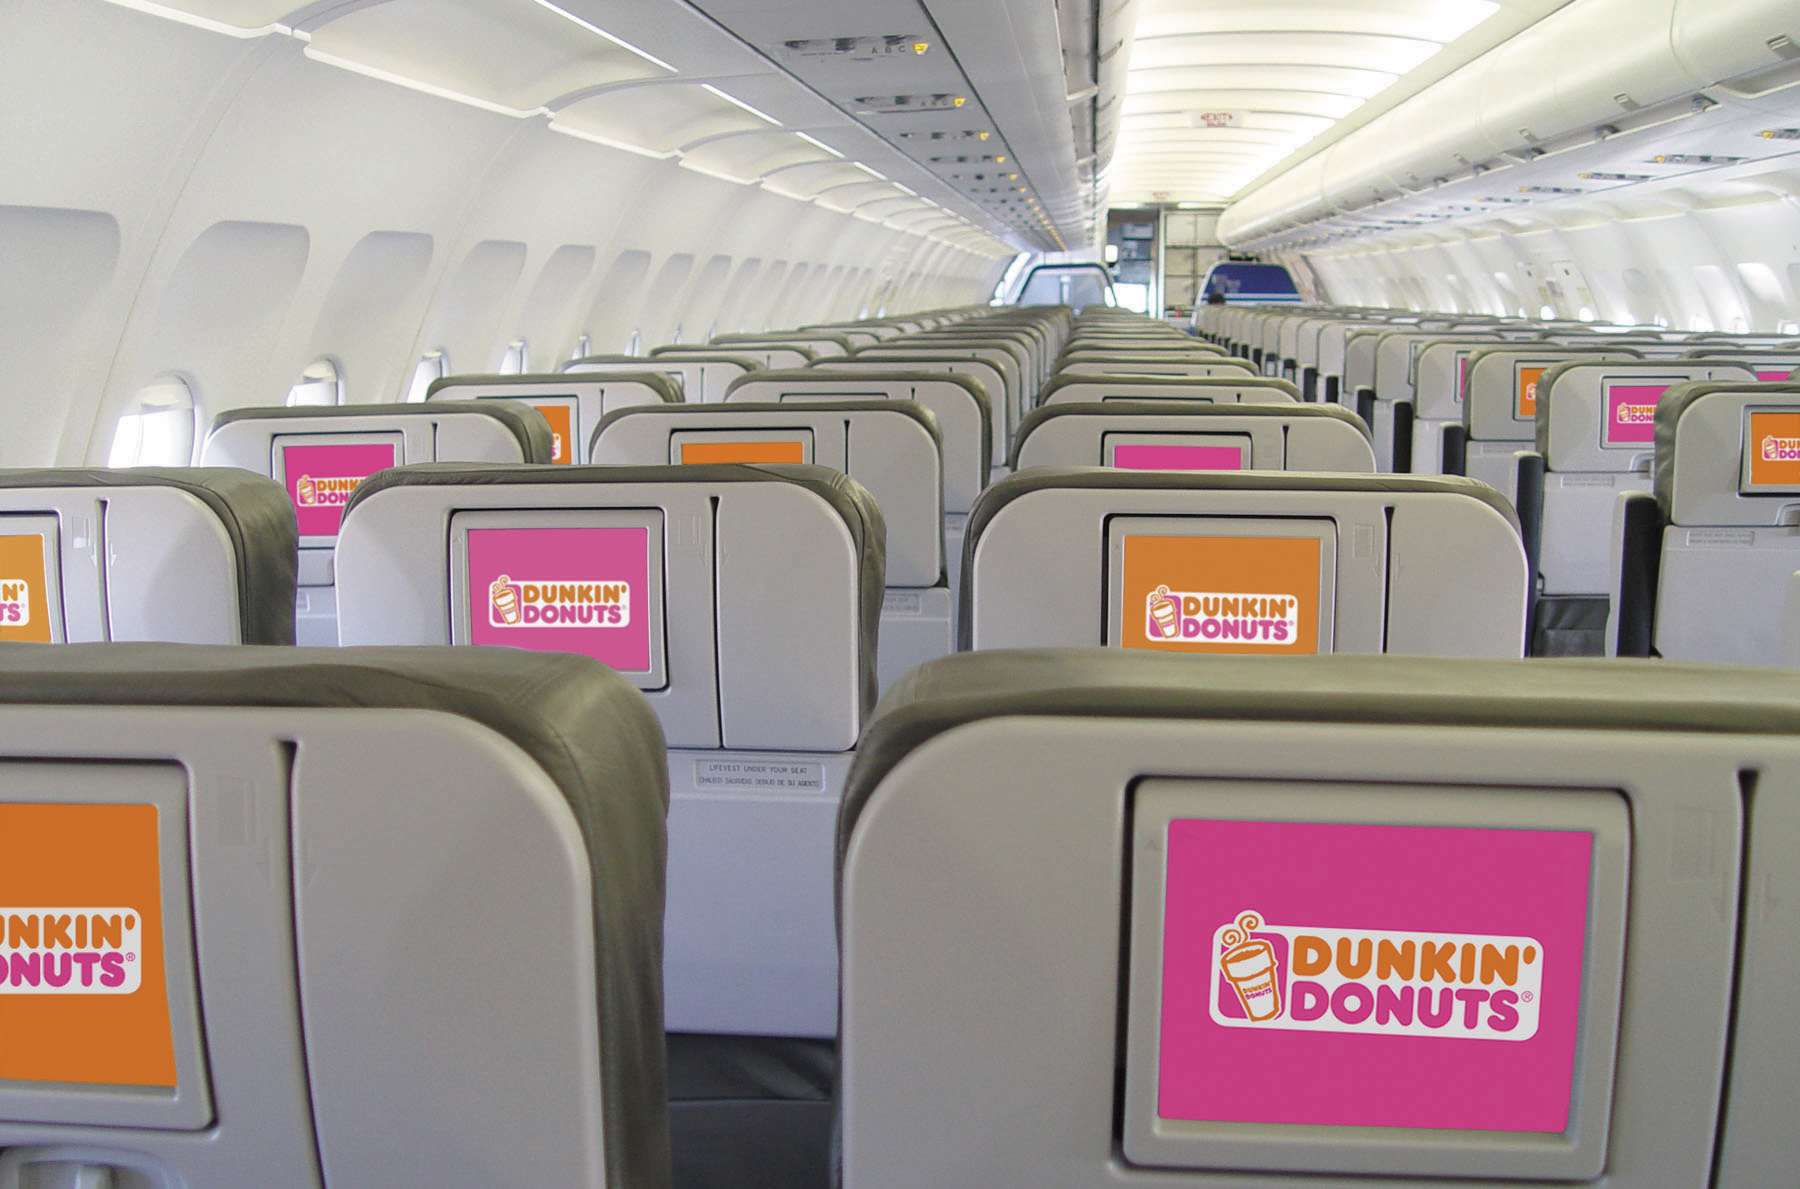 JetBlue: Now Serving Dunkin' Donuts